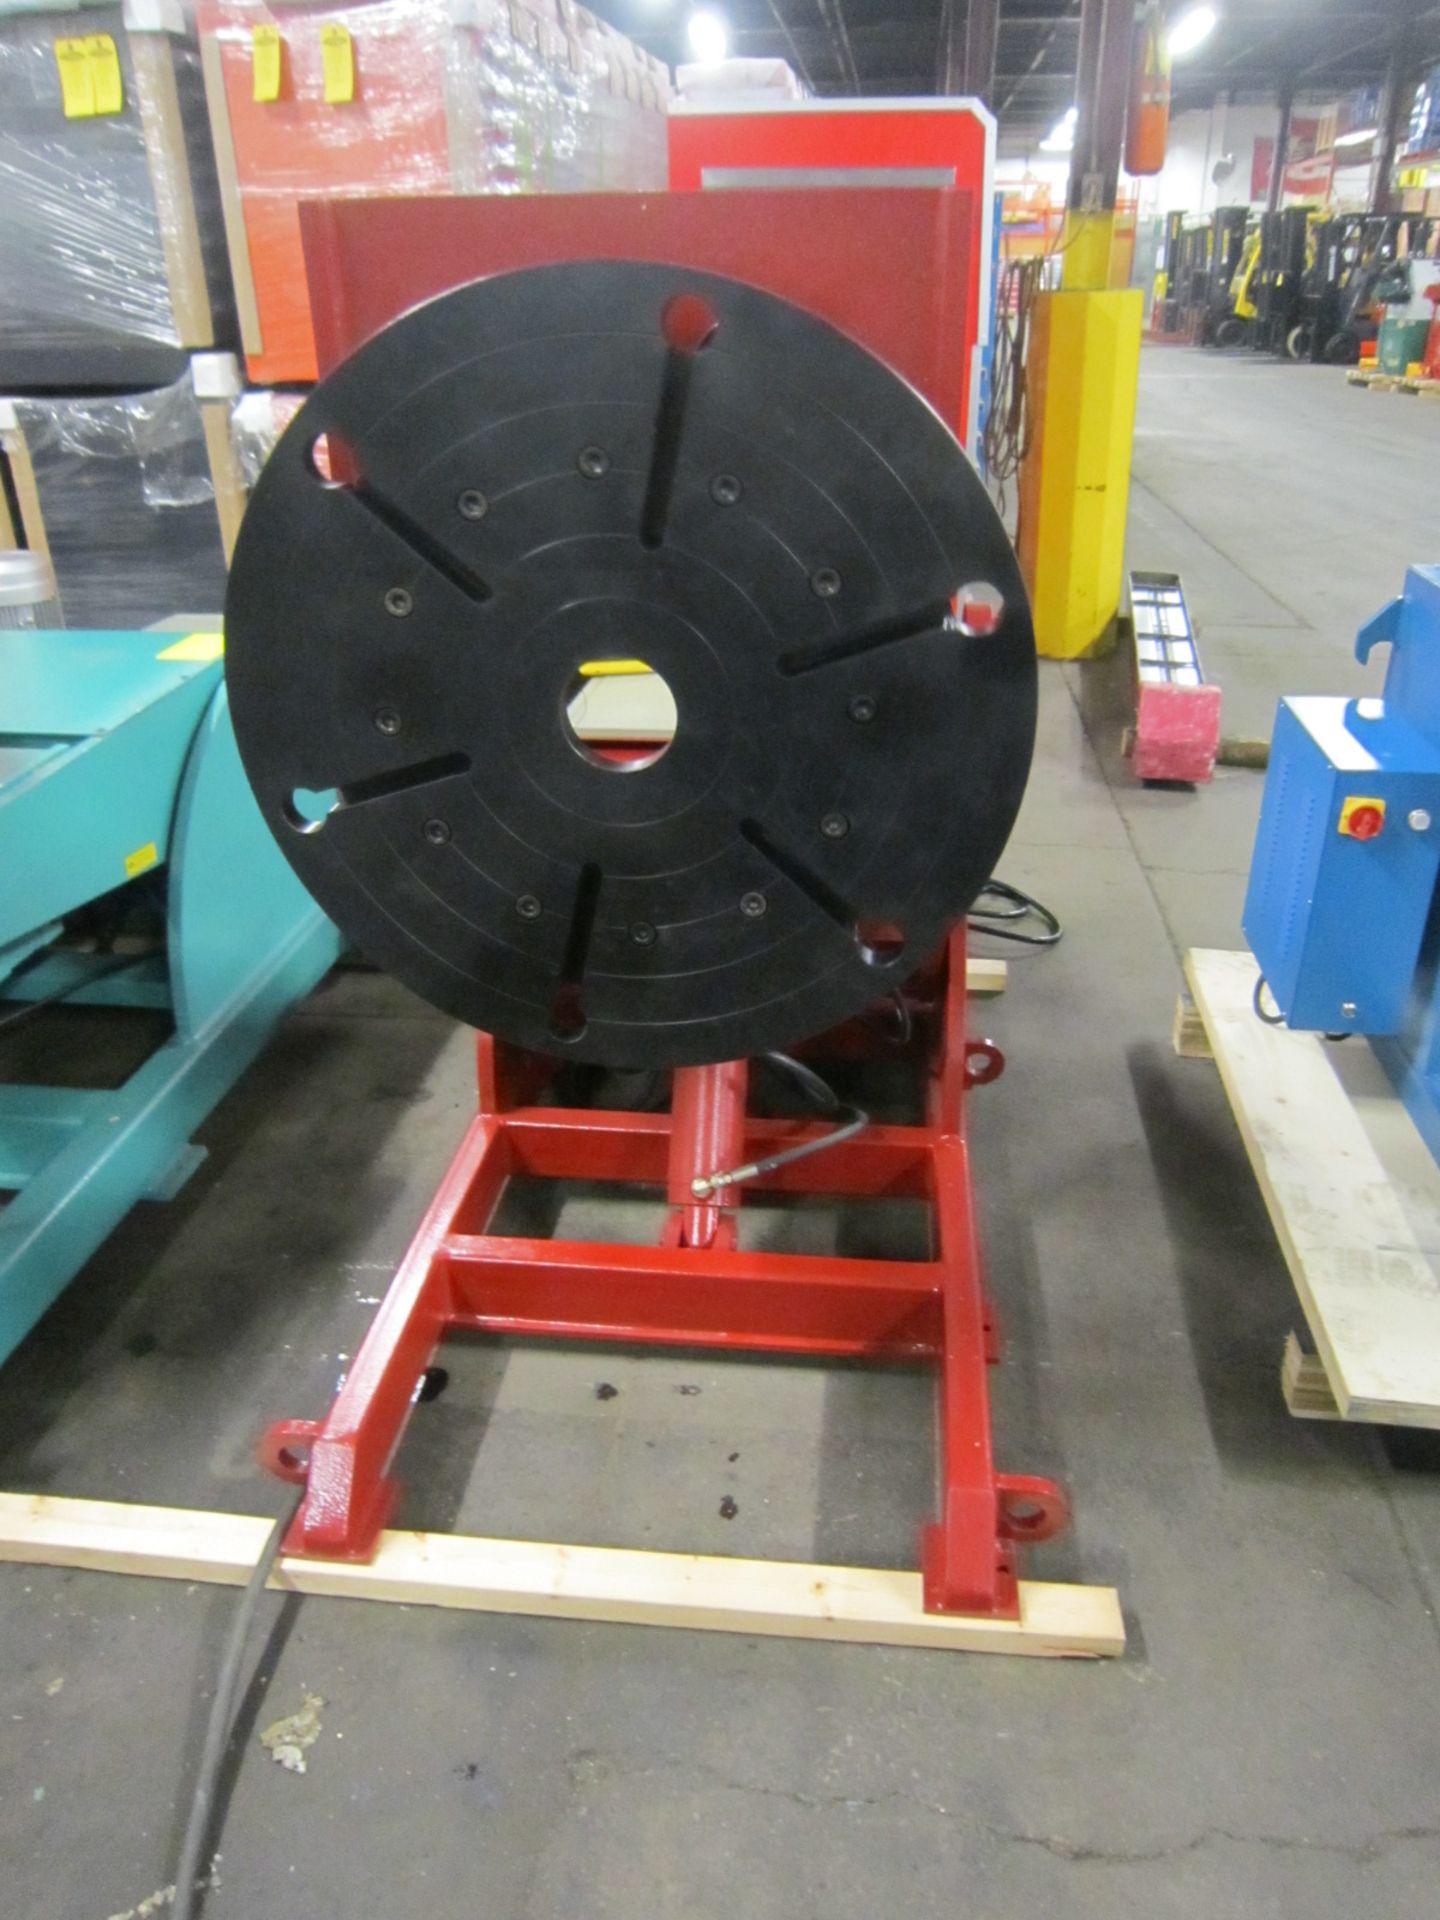 Verner model VT-1500 WELDING POSITIONER with EXTRA TILTING CAPABILITY - 1500lbs capacity - tilt - Image 3 of 3